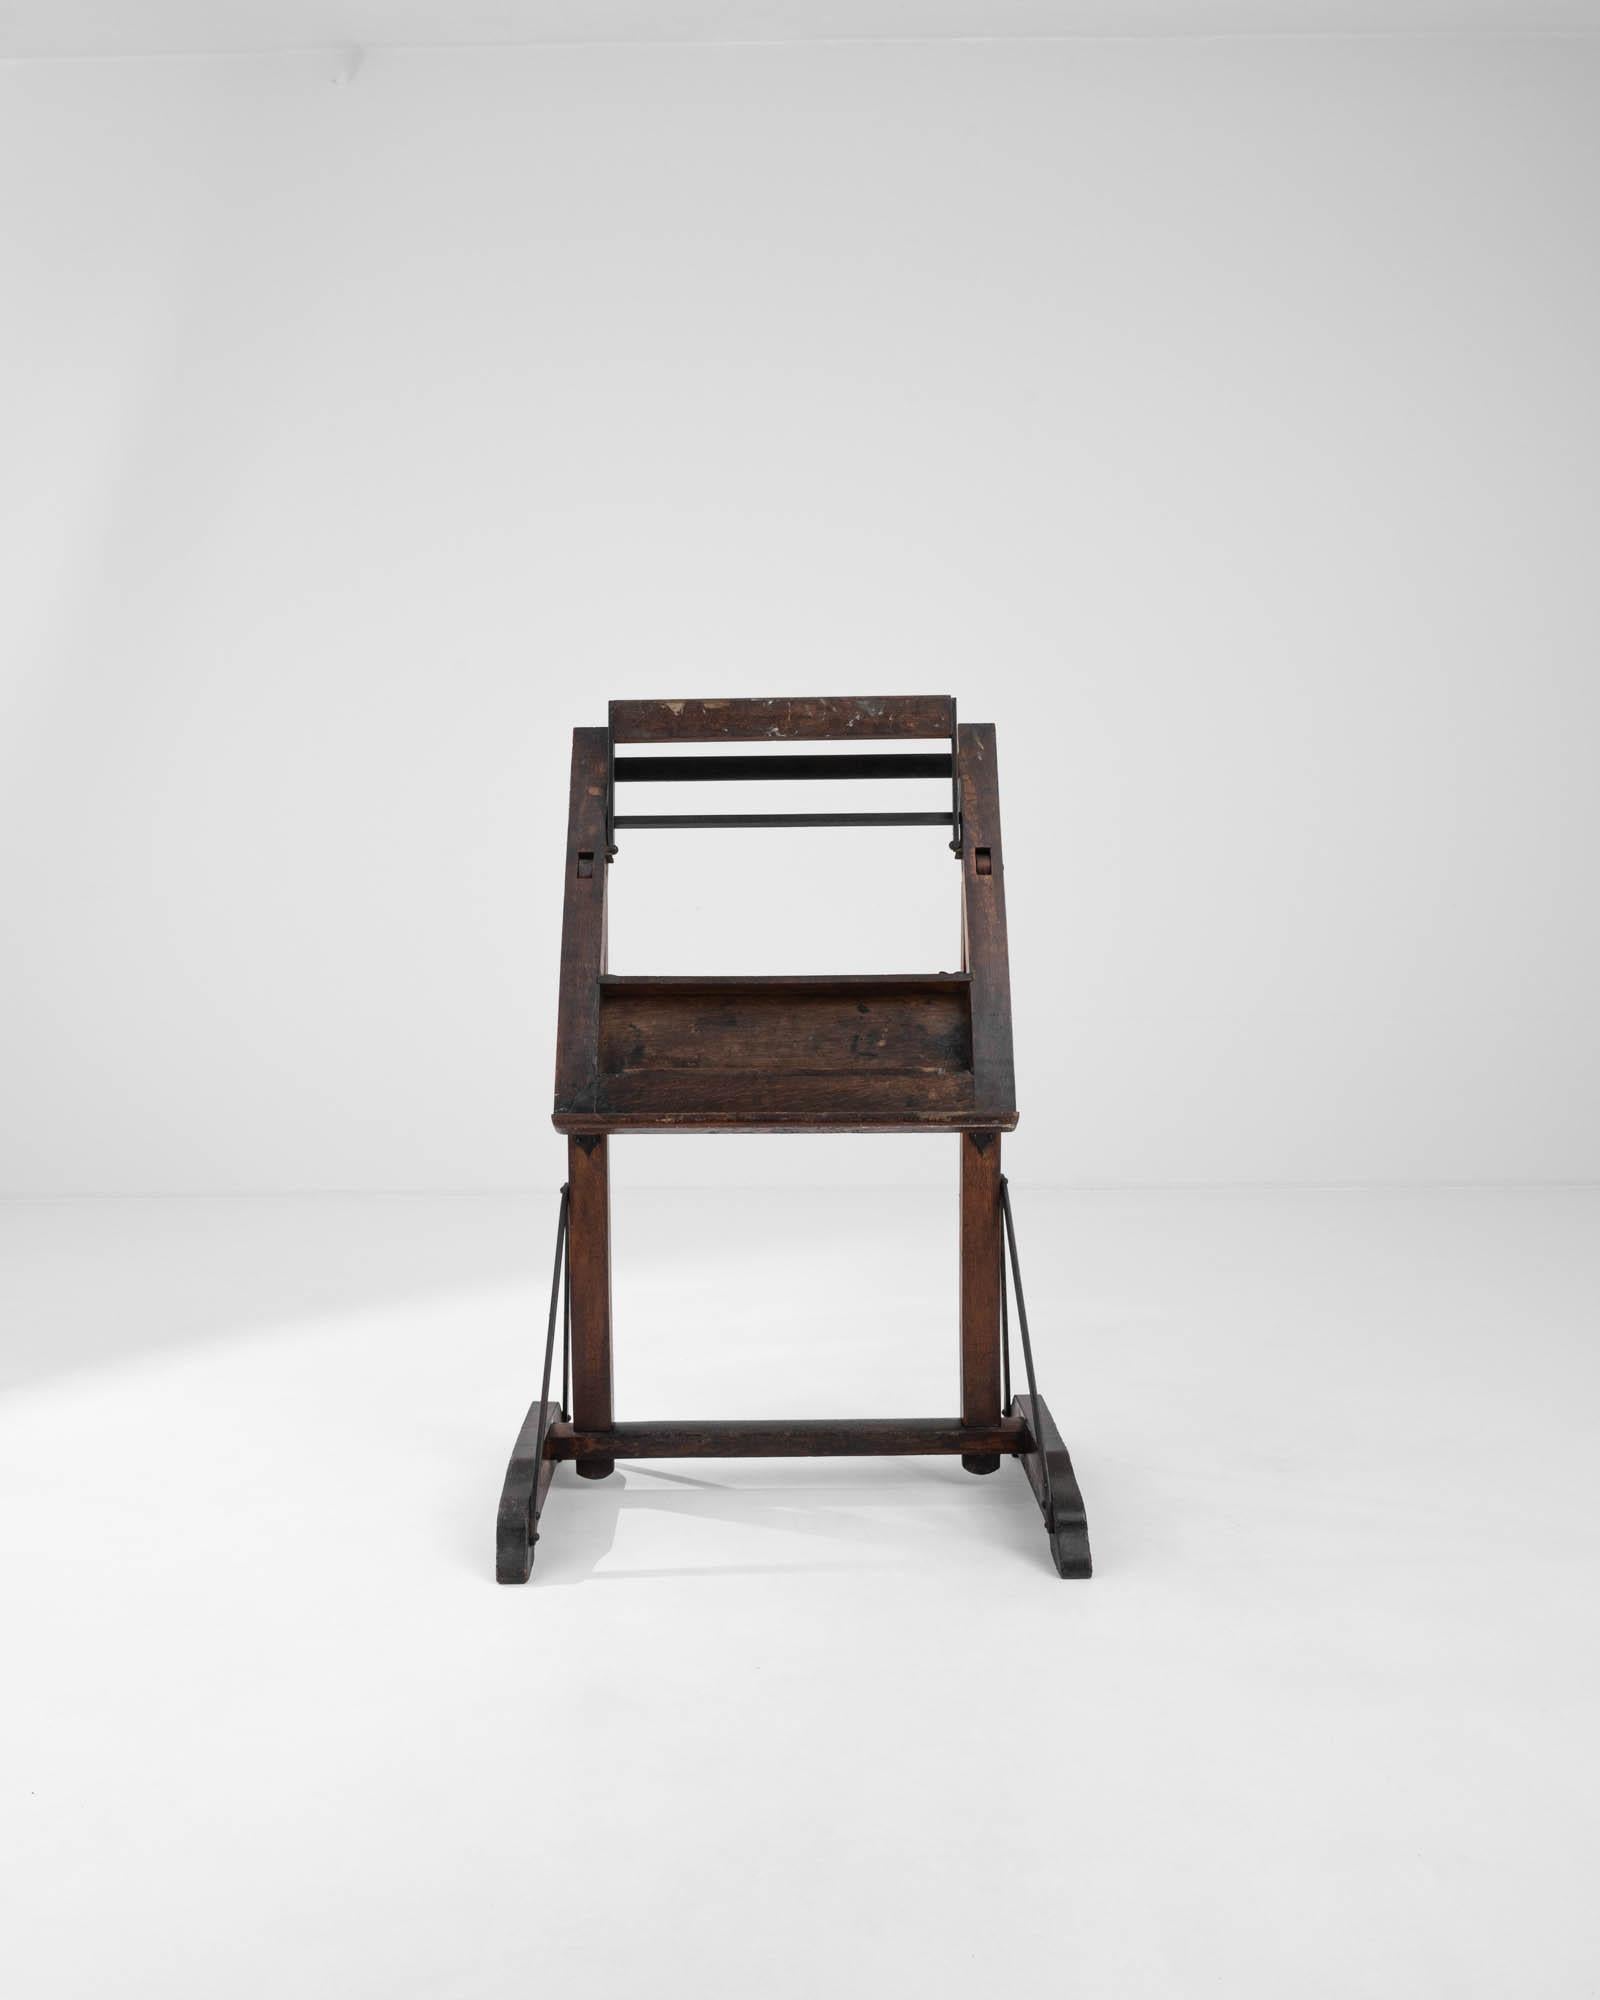 Compact and practical, this antique easel exudes the bohemian ambiance of 1900s France. Large bracket feet that elevate the square structure of the easel's body provide excellent support. The frame can be adjusted to control the angle, height, and